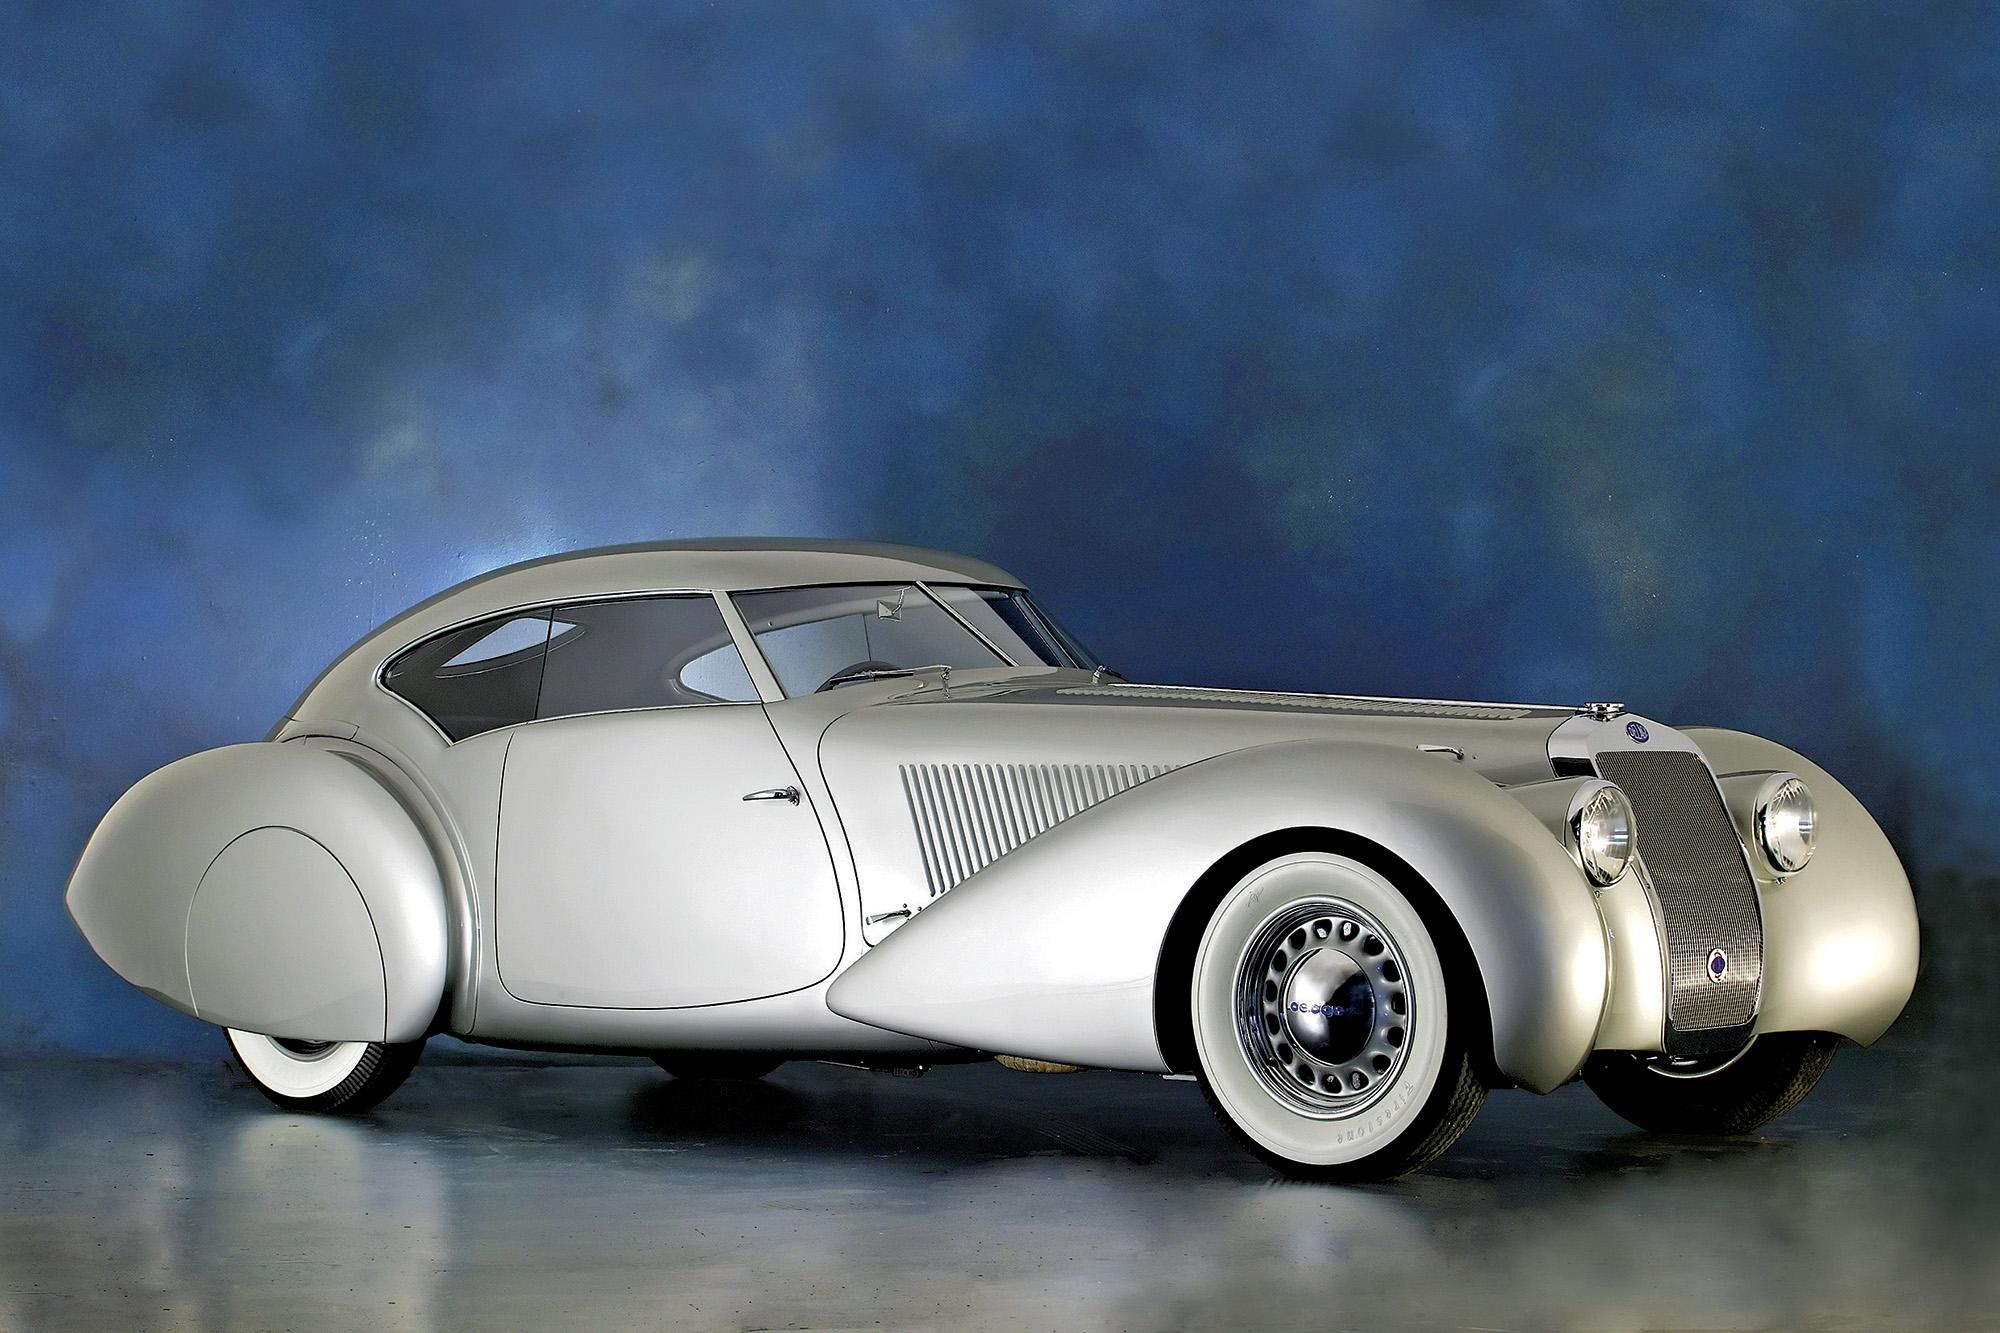 From the get-go, 1937 Delage D8-120 S Pourtout Aéro Coupé was meant to win every concours d'elegance